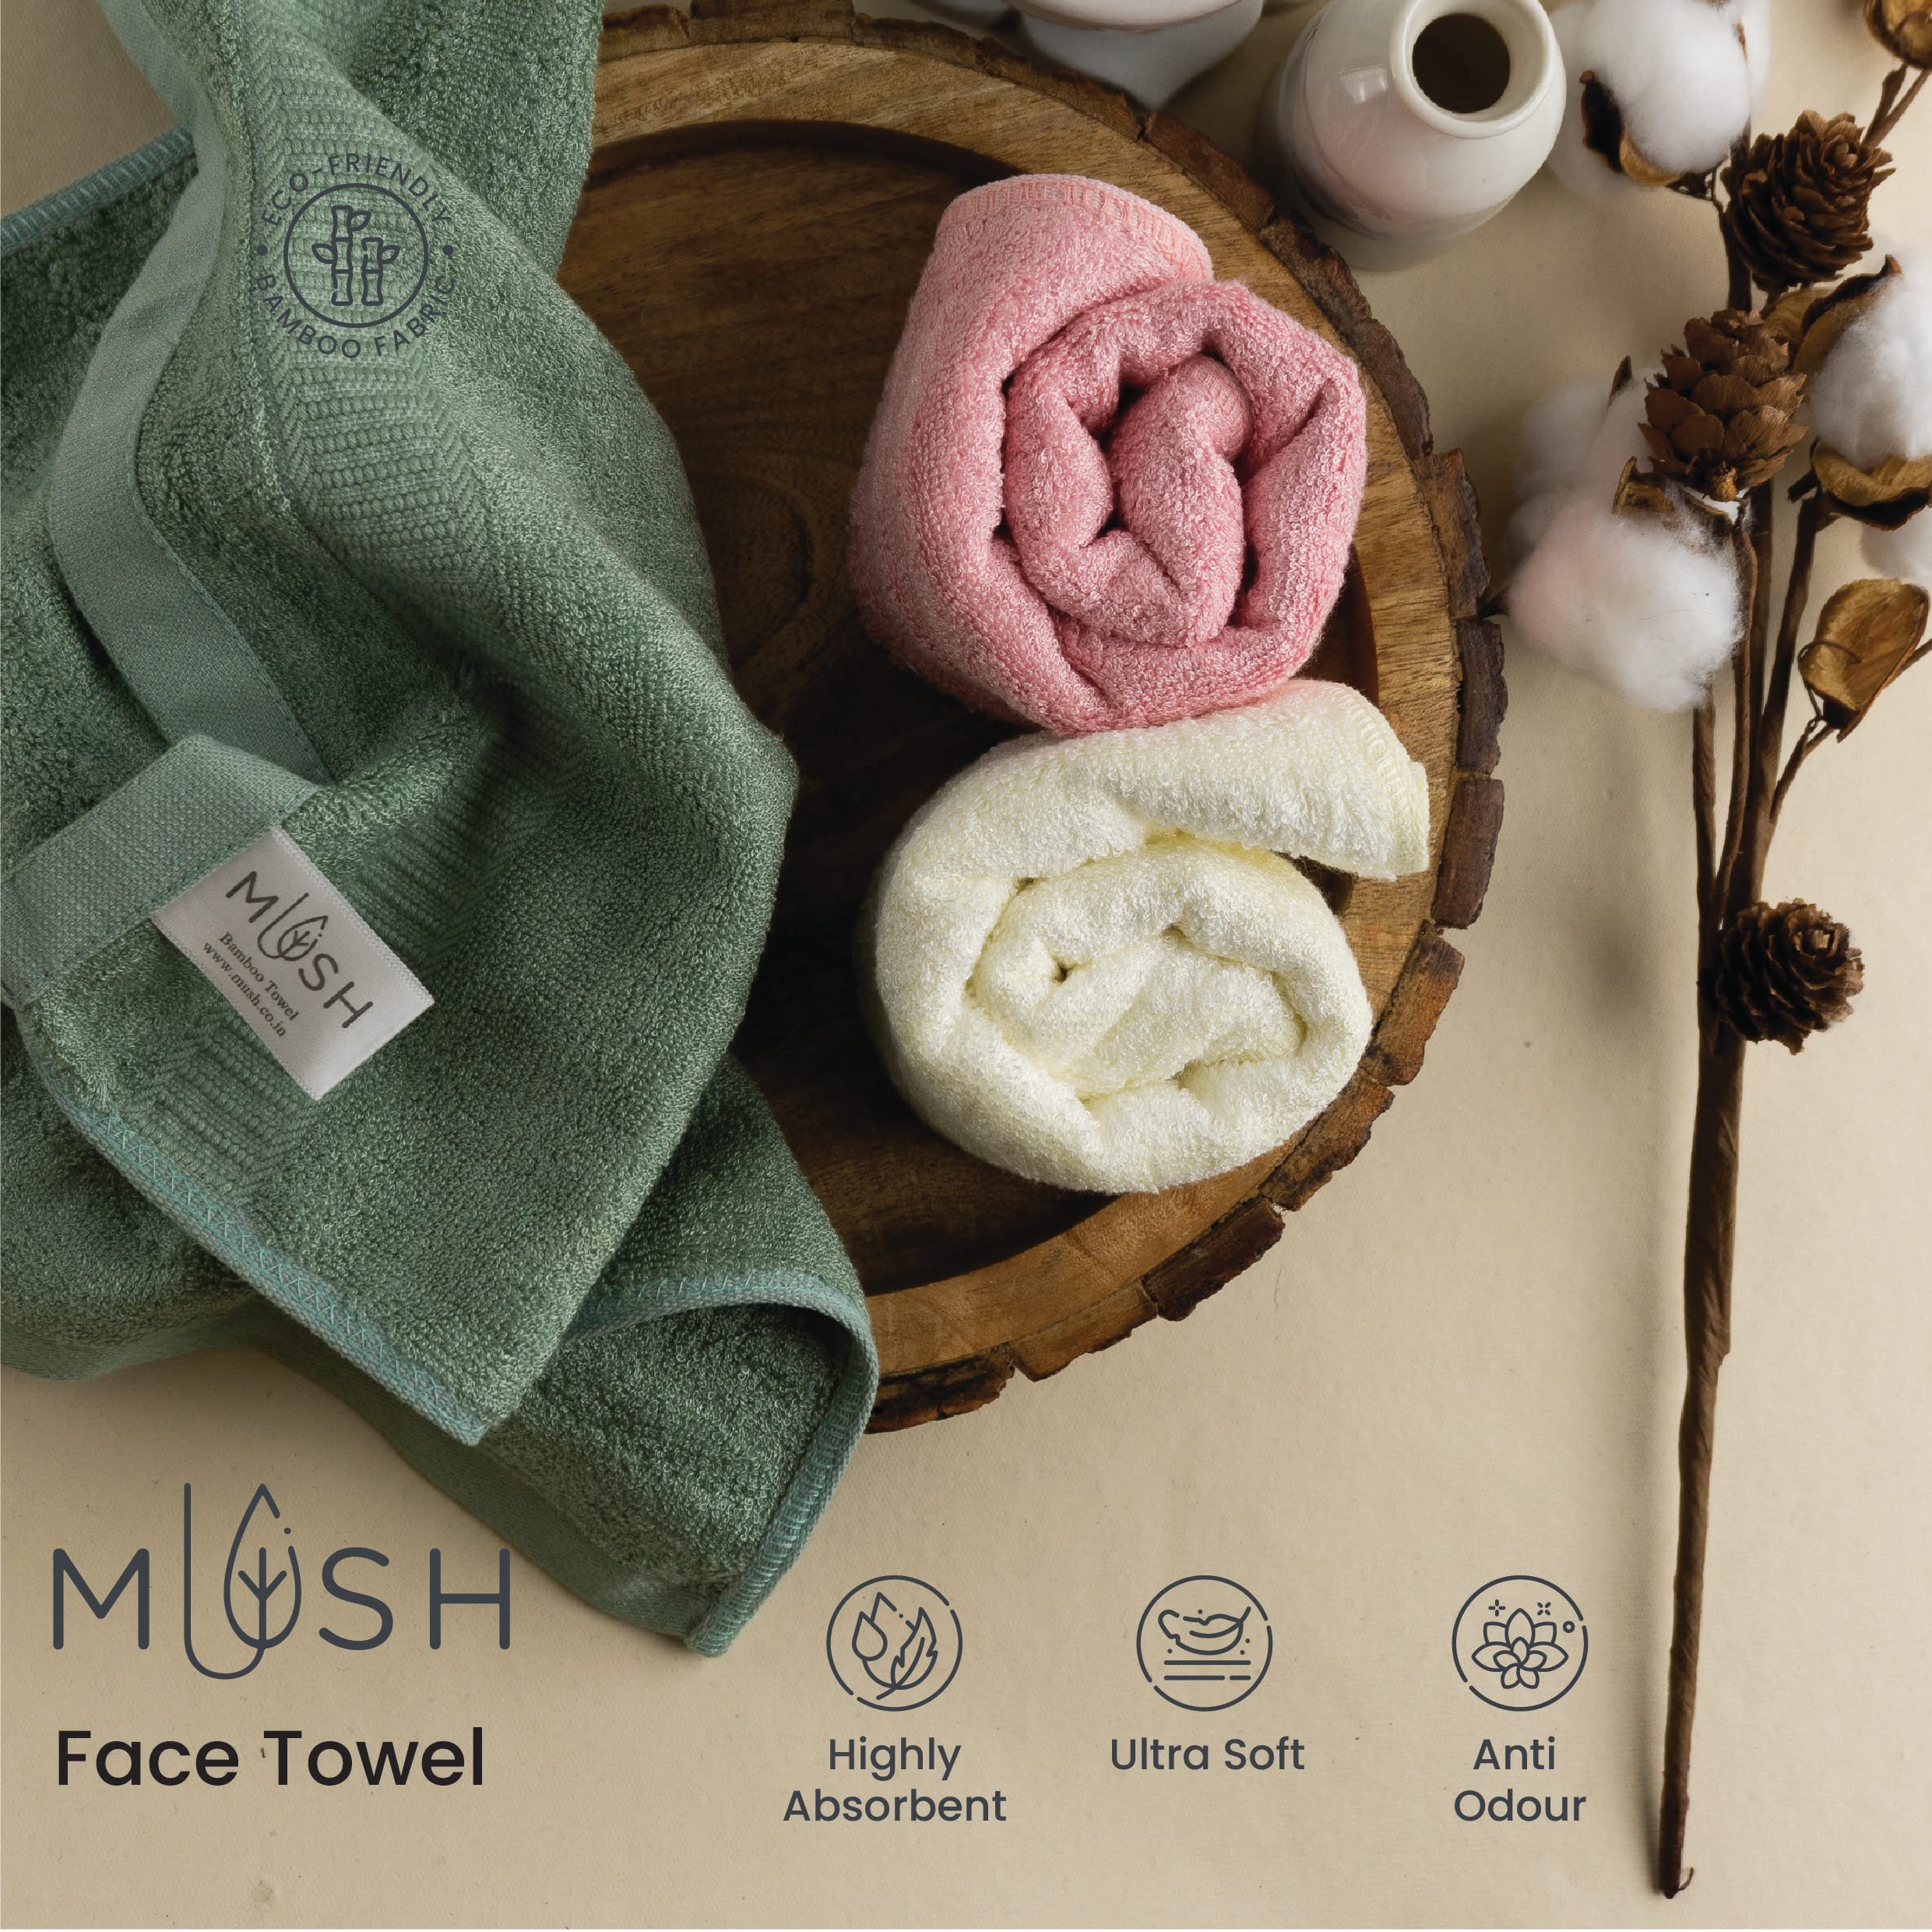 Mush 100% Bamboo Face Towel | Ultra Soft, Absorbent, & Quick Dry Towels for Facewash, Gym, Travel | Suitable for Sensitive/Acne Prone Skin | 13 x 13 Inches | 500 GSM (Green,Pink,Grey)